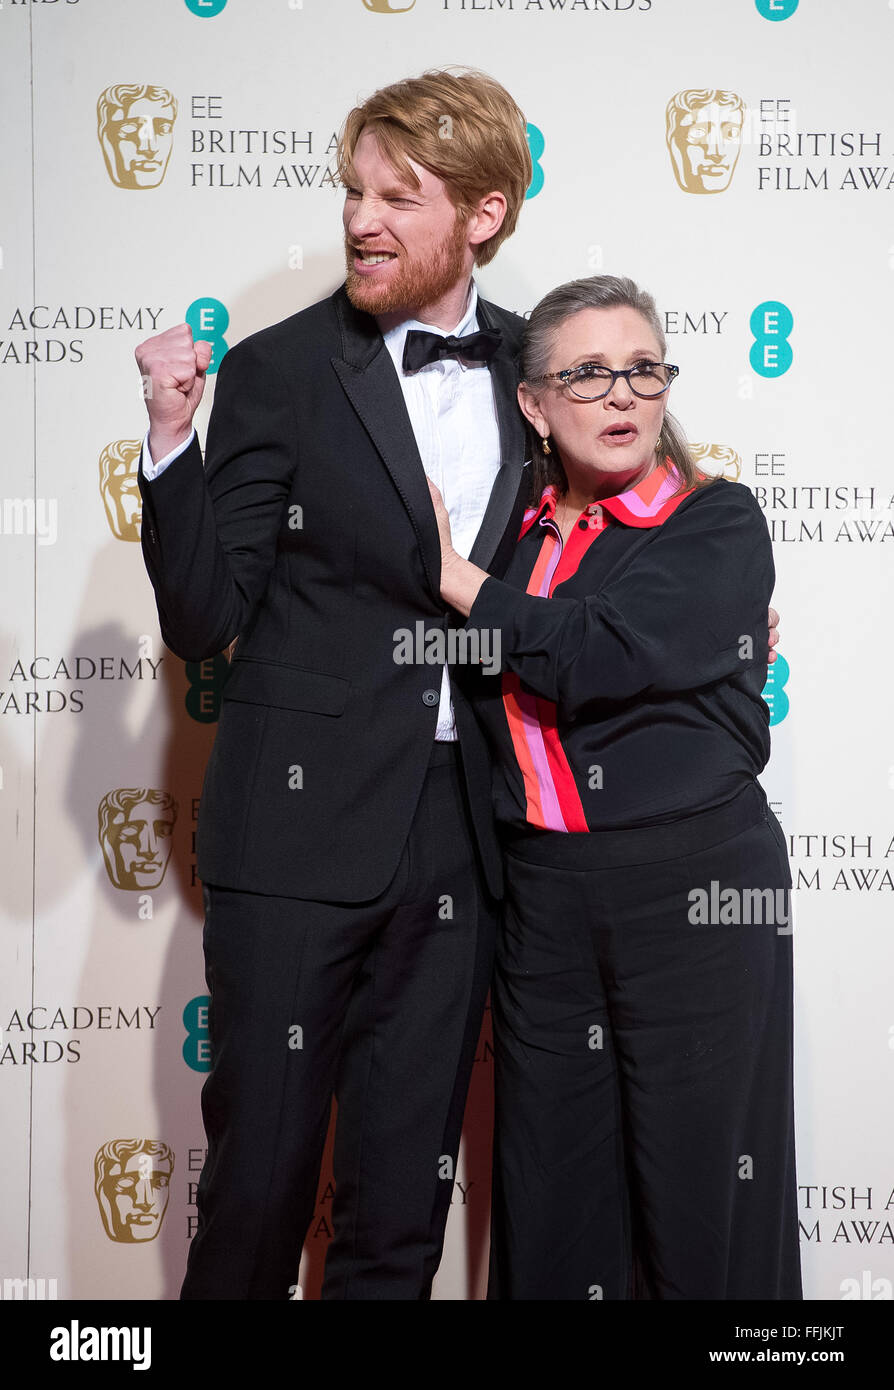 London, UK. 14th February, 2016. Actors Domhnall Gleeson and Carrie Fisher pose in the press room of the EE British Academy Film Awards, BAFTA Awards, at the Royal Opera House in London, England, on 14 February 2016. Credit:  dpa picture alliance/Alamy Live News Stock Photo